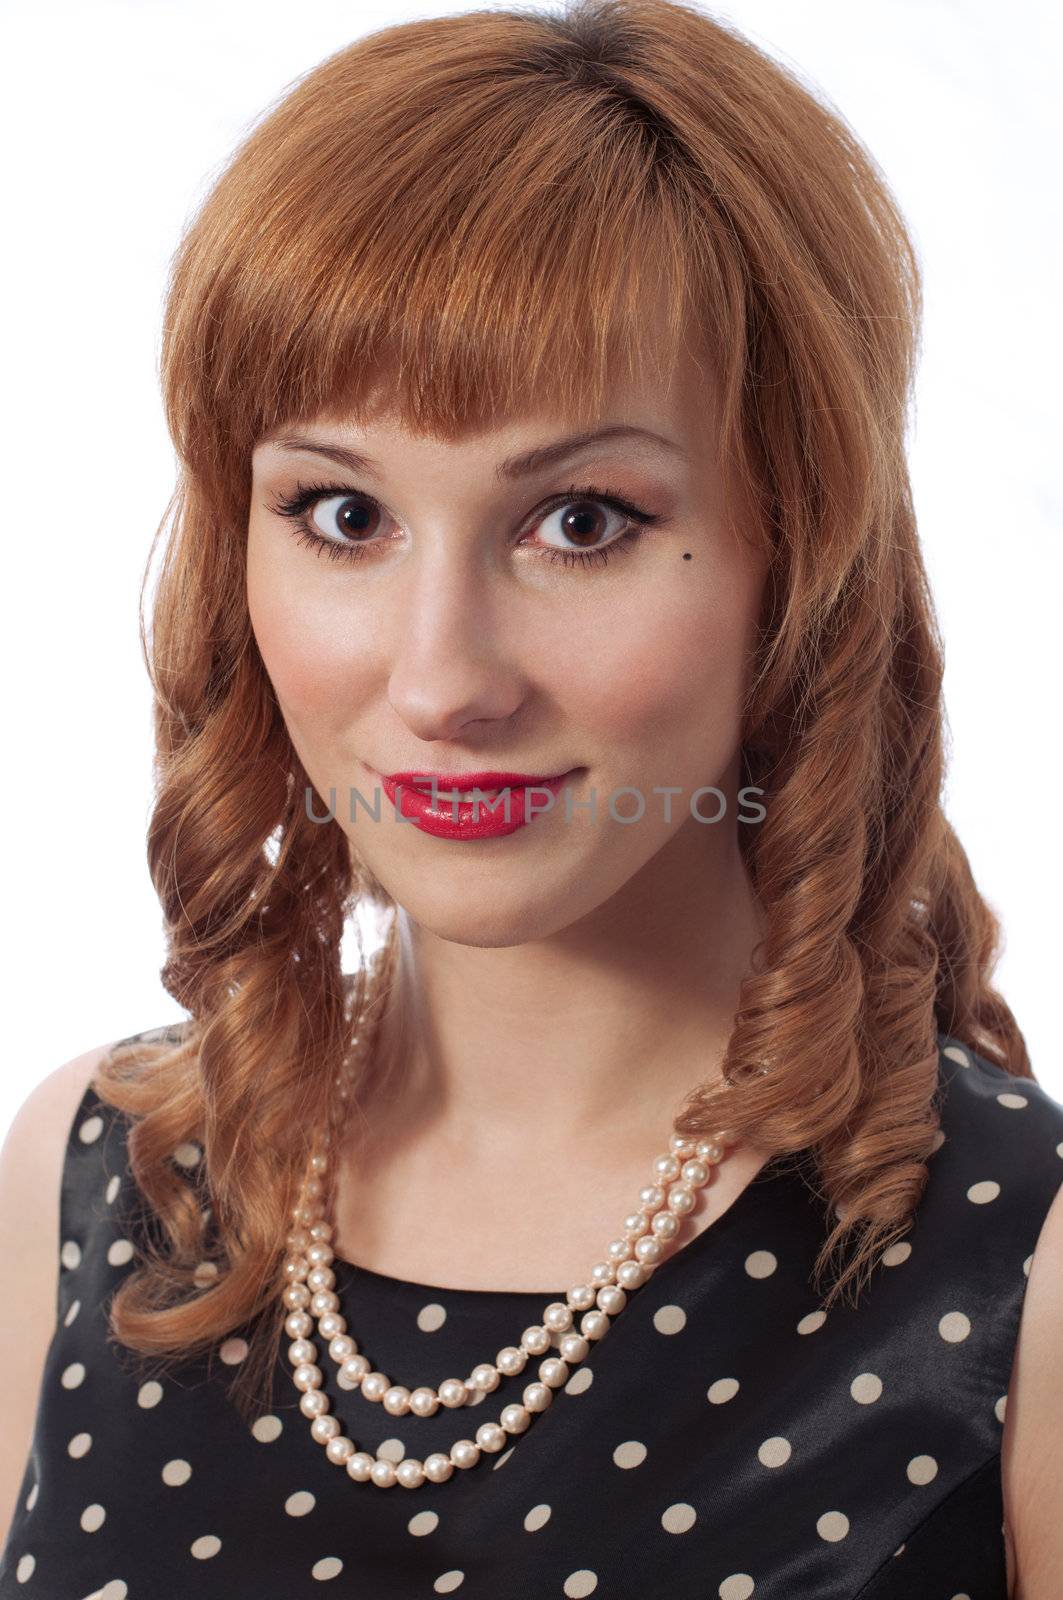 Retro girl with pearl necklace smiling